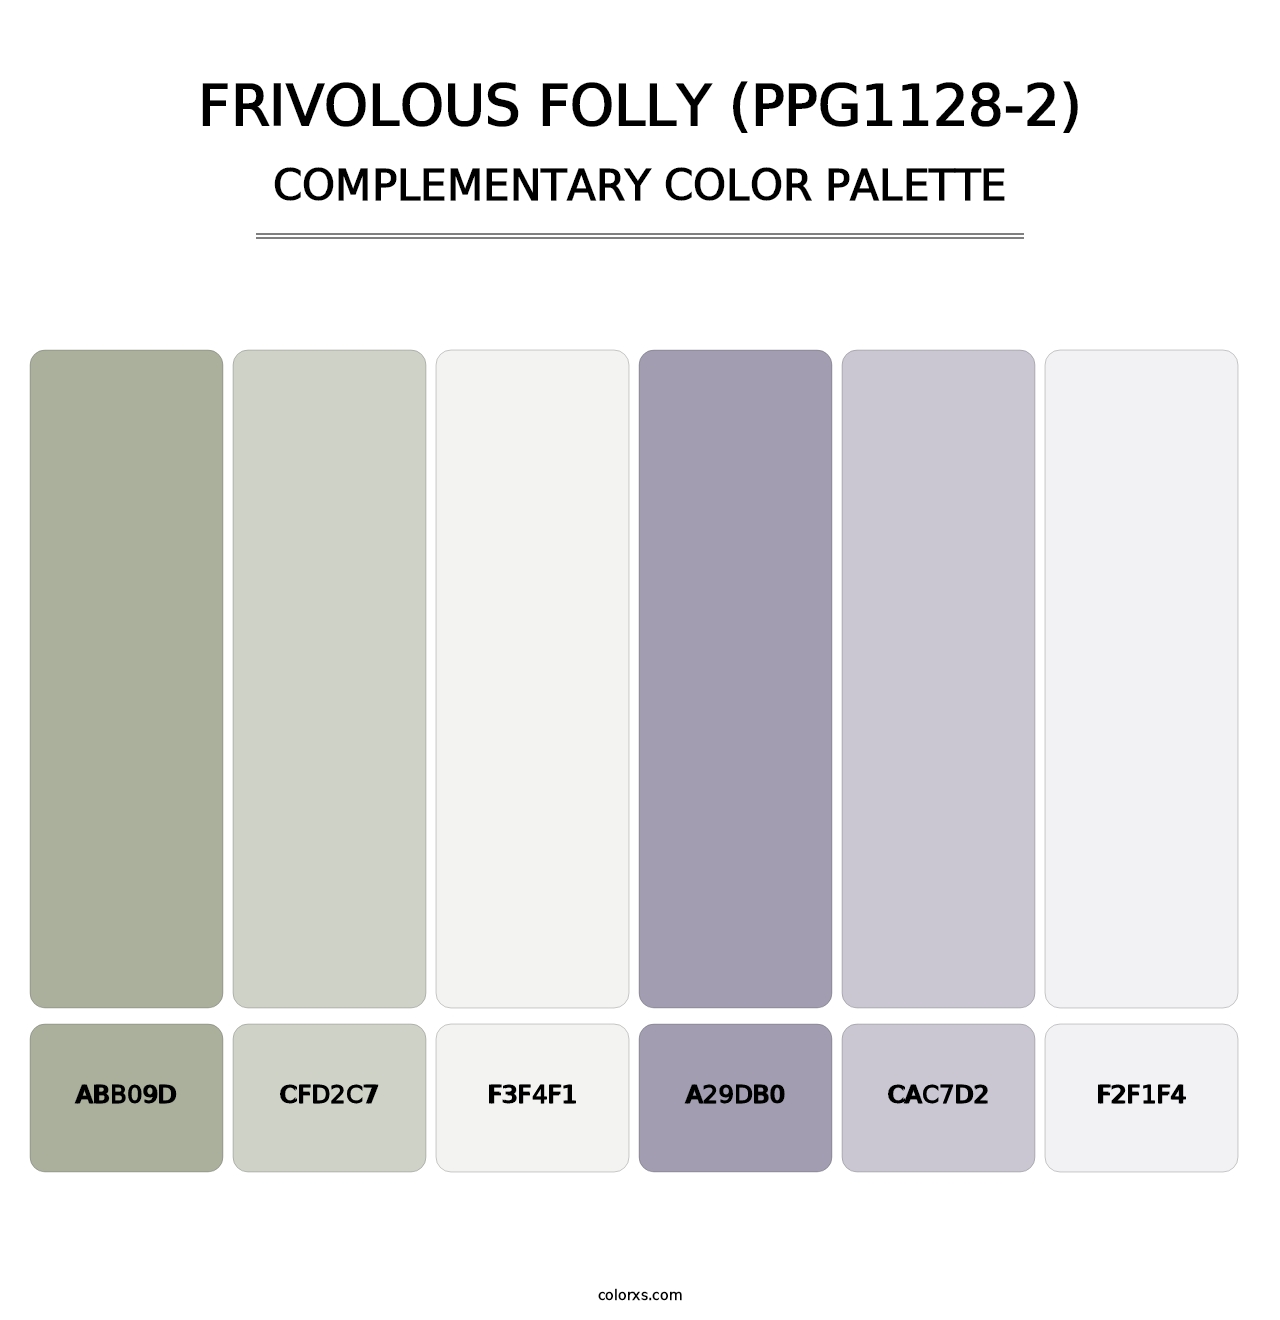 Frivolous Folly (PPG1128-2) - Complementary Color Palette